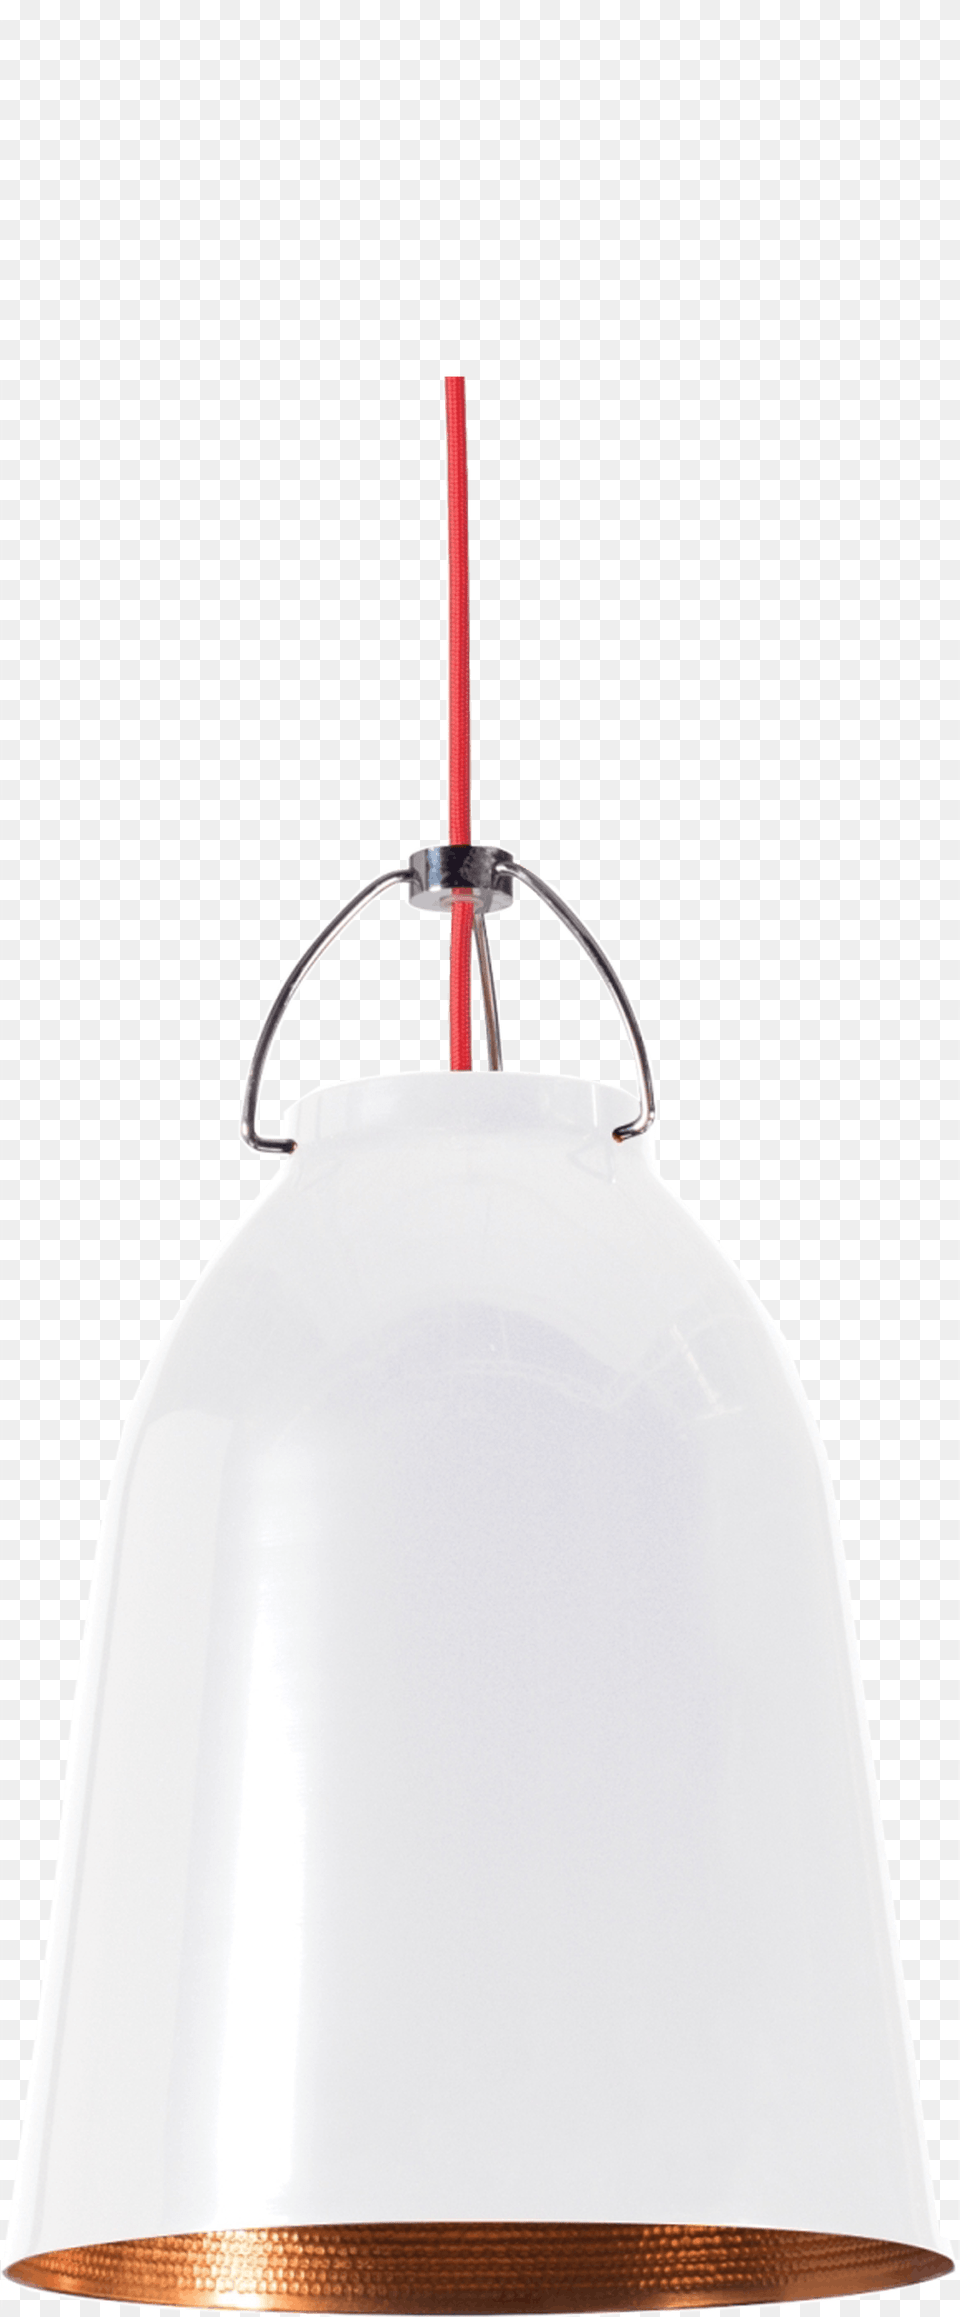 Home Home Decor Lighting Pendant Lights Lamp, Lampshade Png